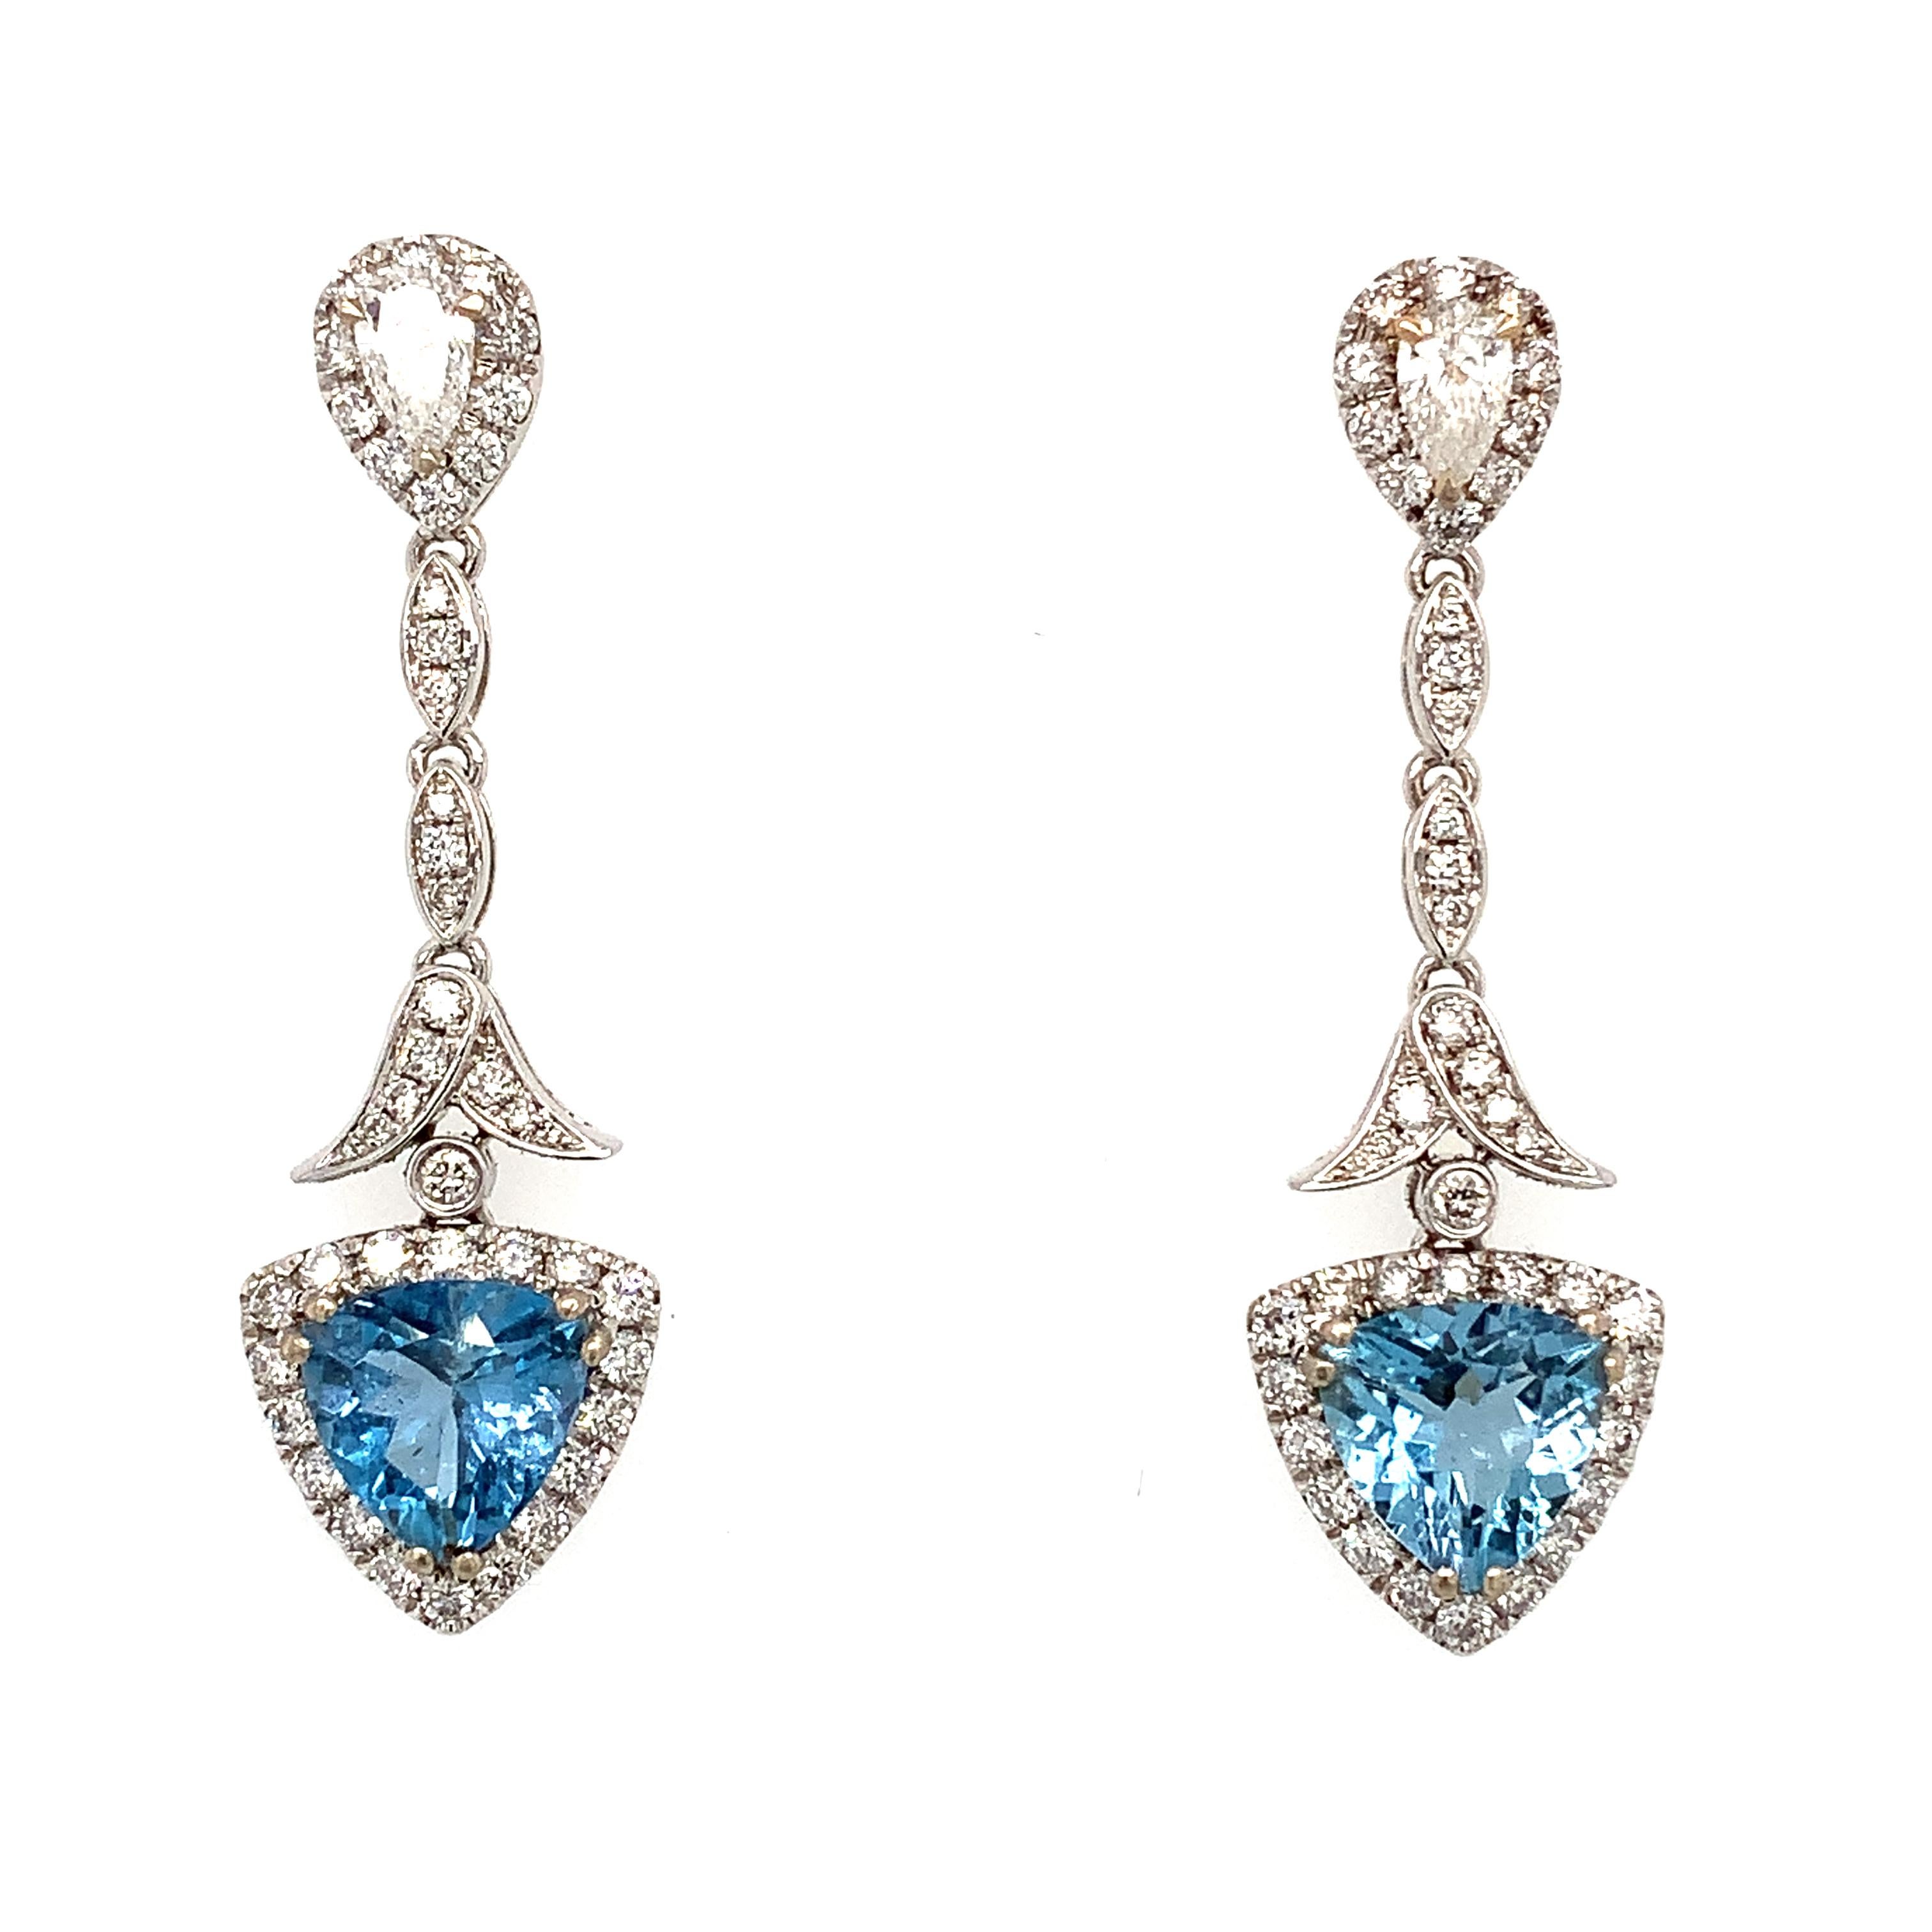 Gorgeous aquamarine and diamonds drop dangle studs earrings in 18ct white gold. 
Composed of trillion cut light blue sky aquamarine gemstone accented by pear shaped and round brilliant cut diamonds drop long earrings all mounted in 18k white